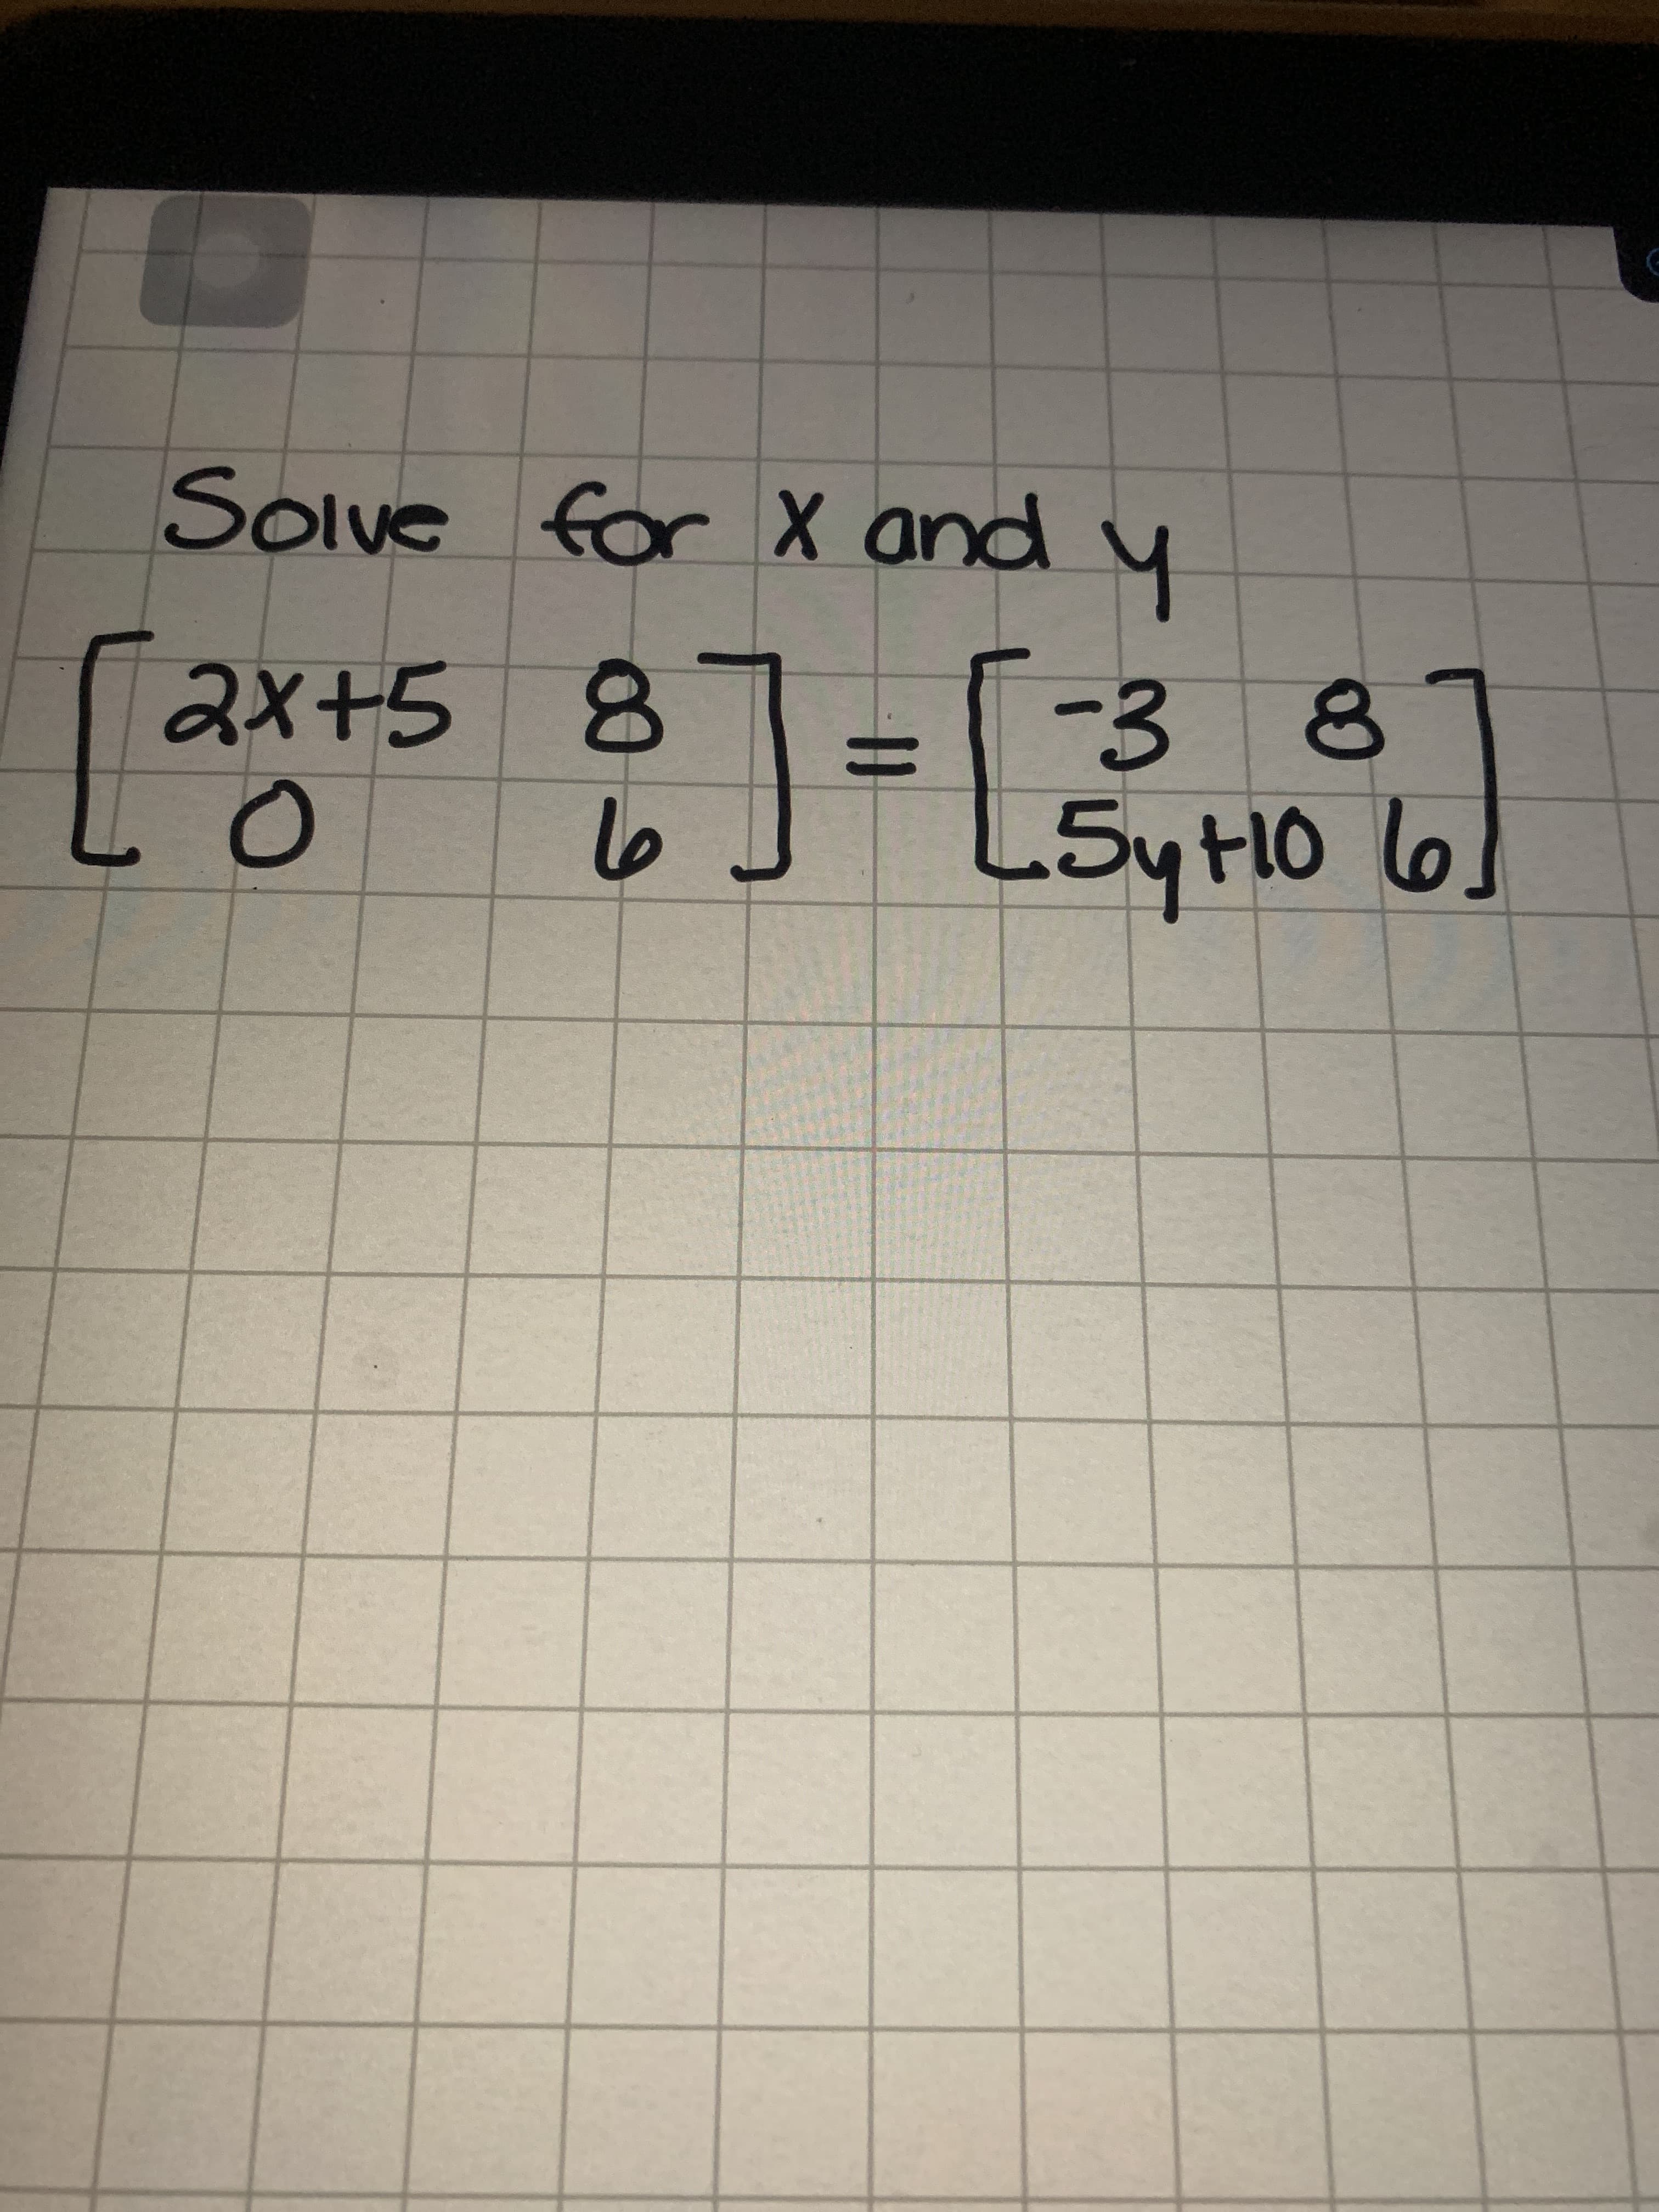 Solve for X and y
(-3 8
L5yt10 6
2x+5 8
%3D
